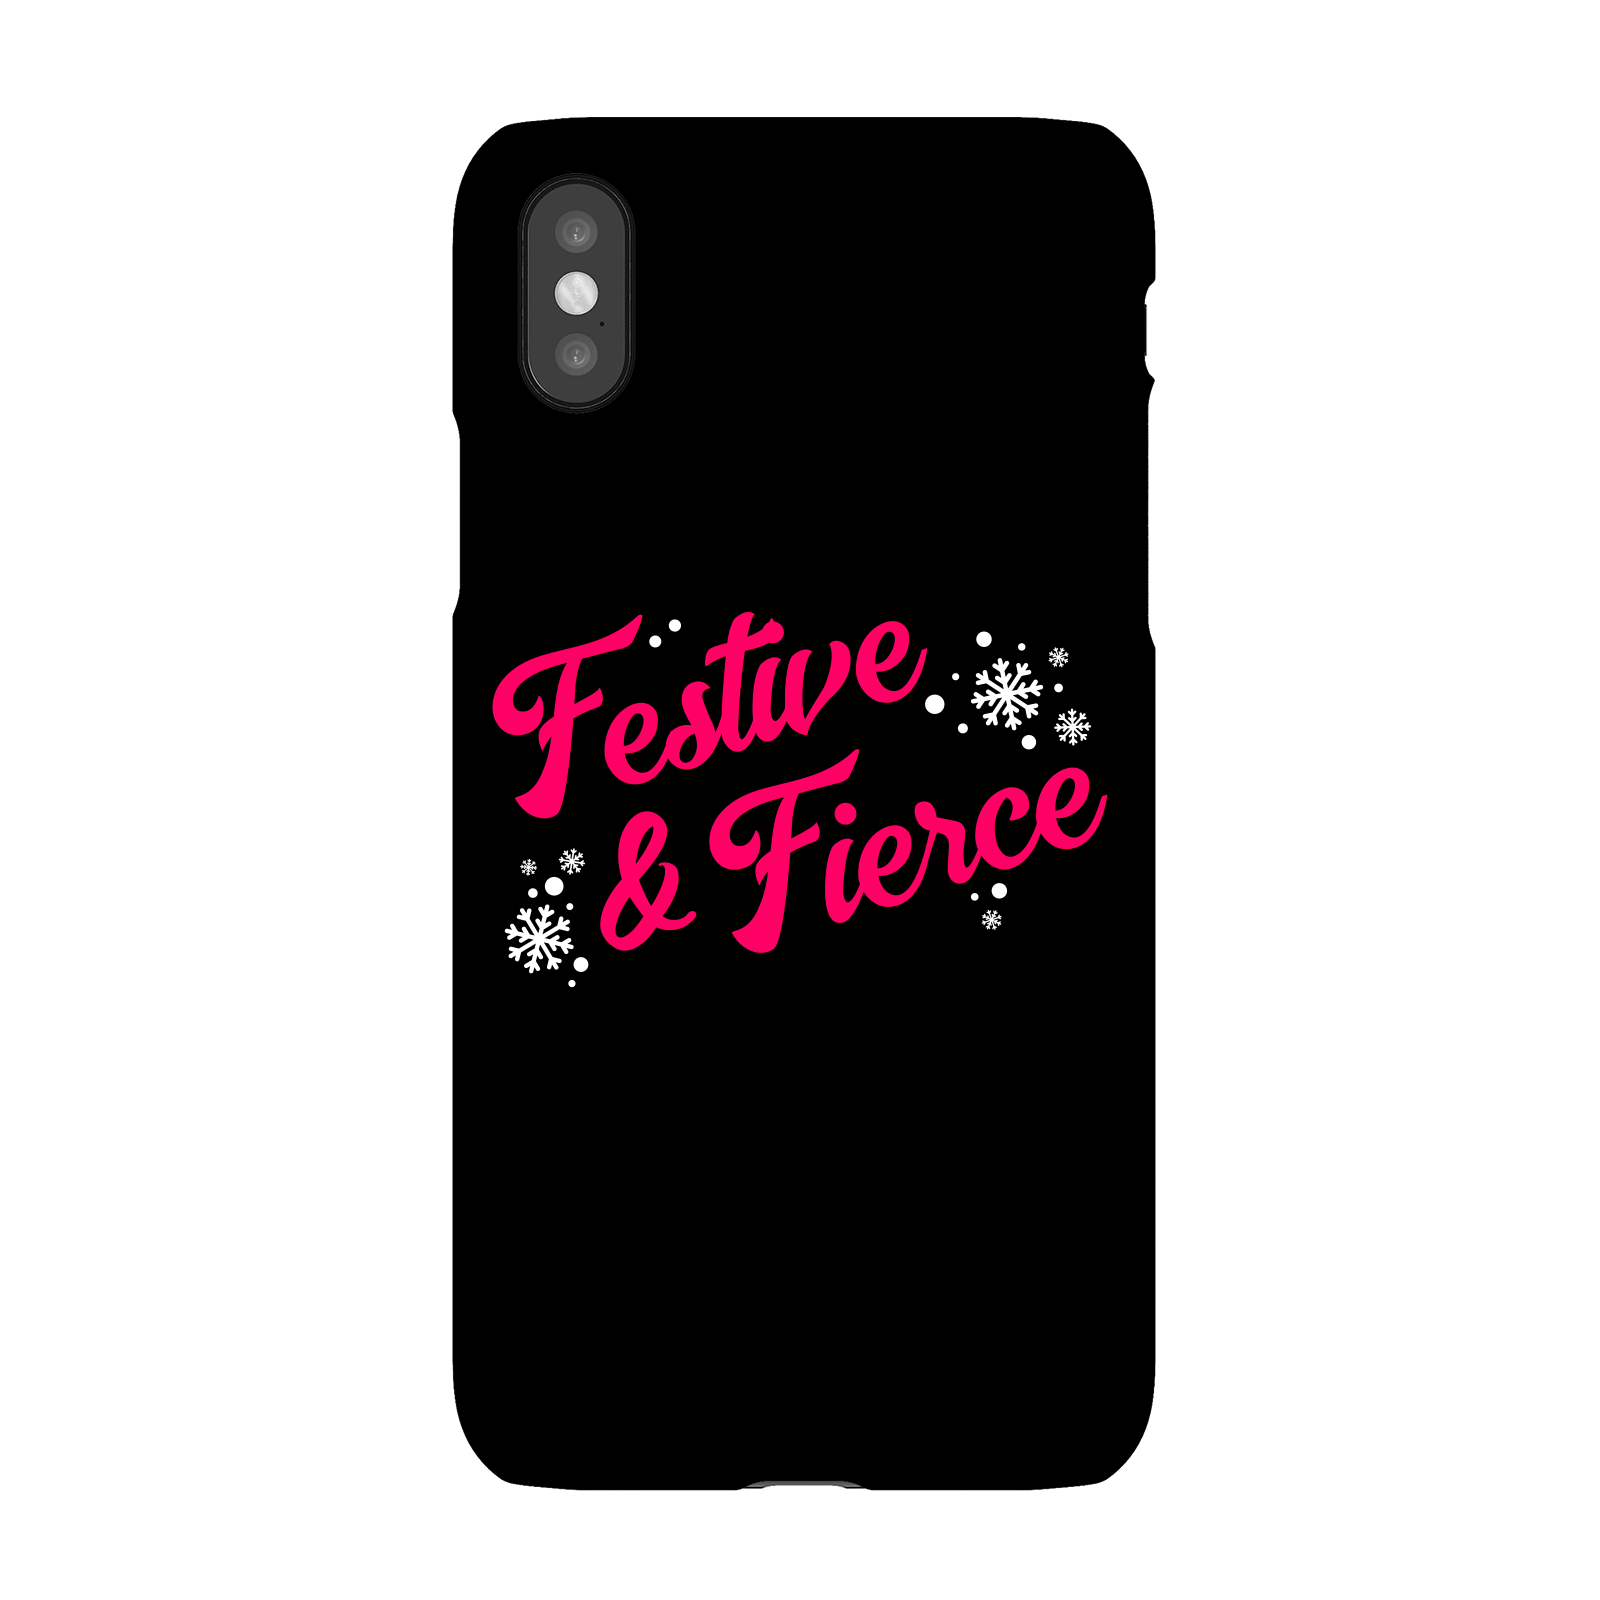 Festive & Fierce Phone Case for iPhone and Android - iPhone 5/5s - Snap Case - Matte